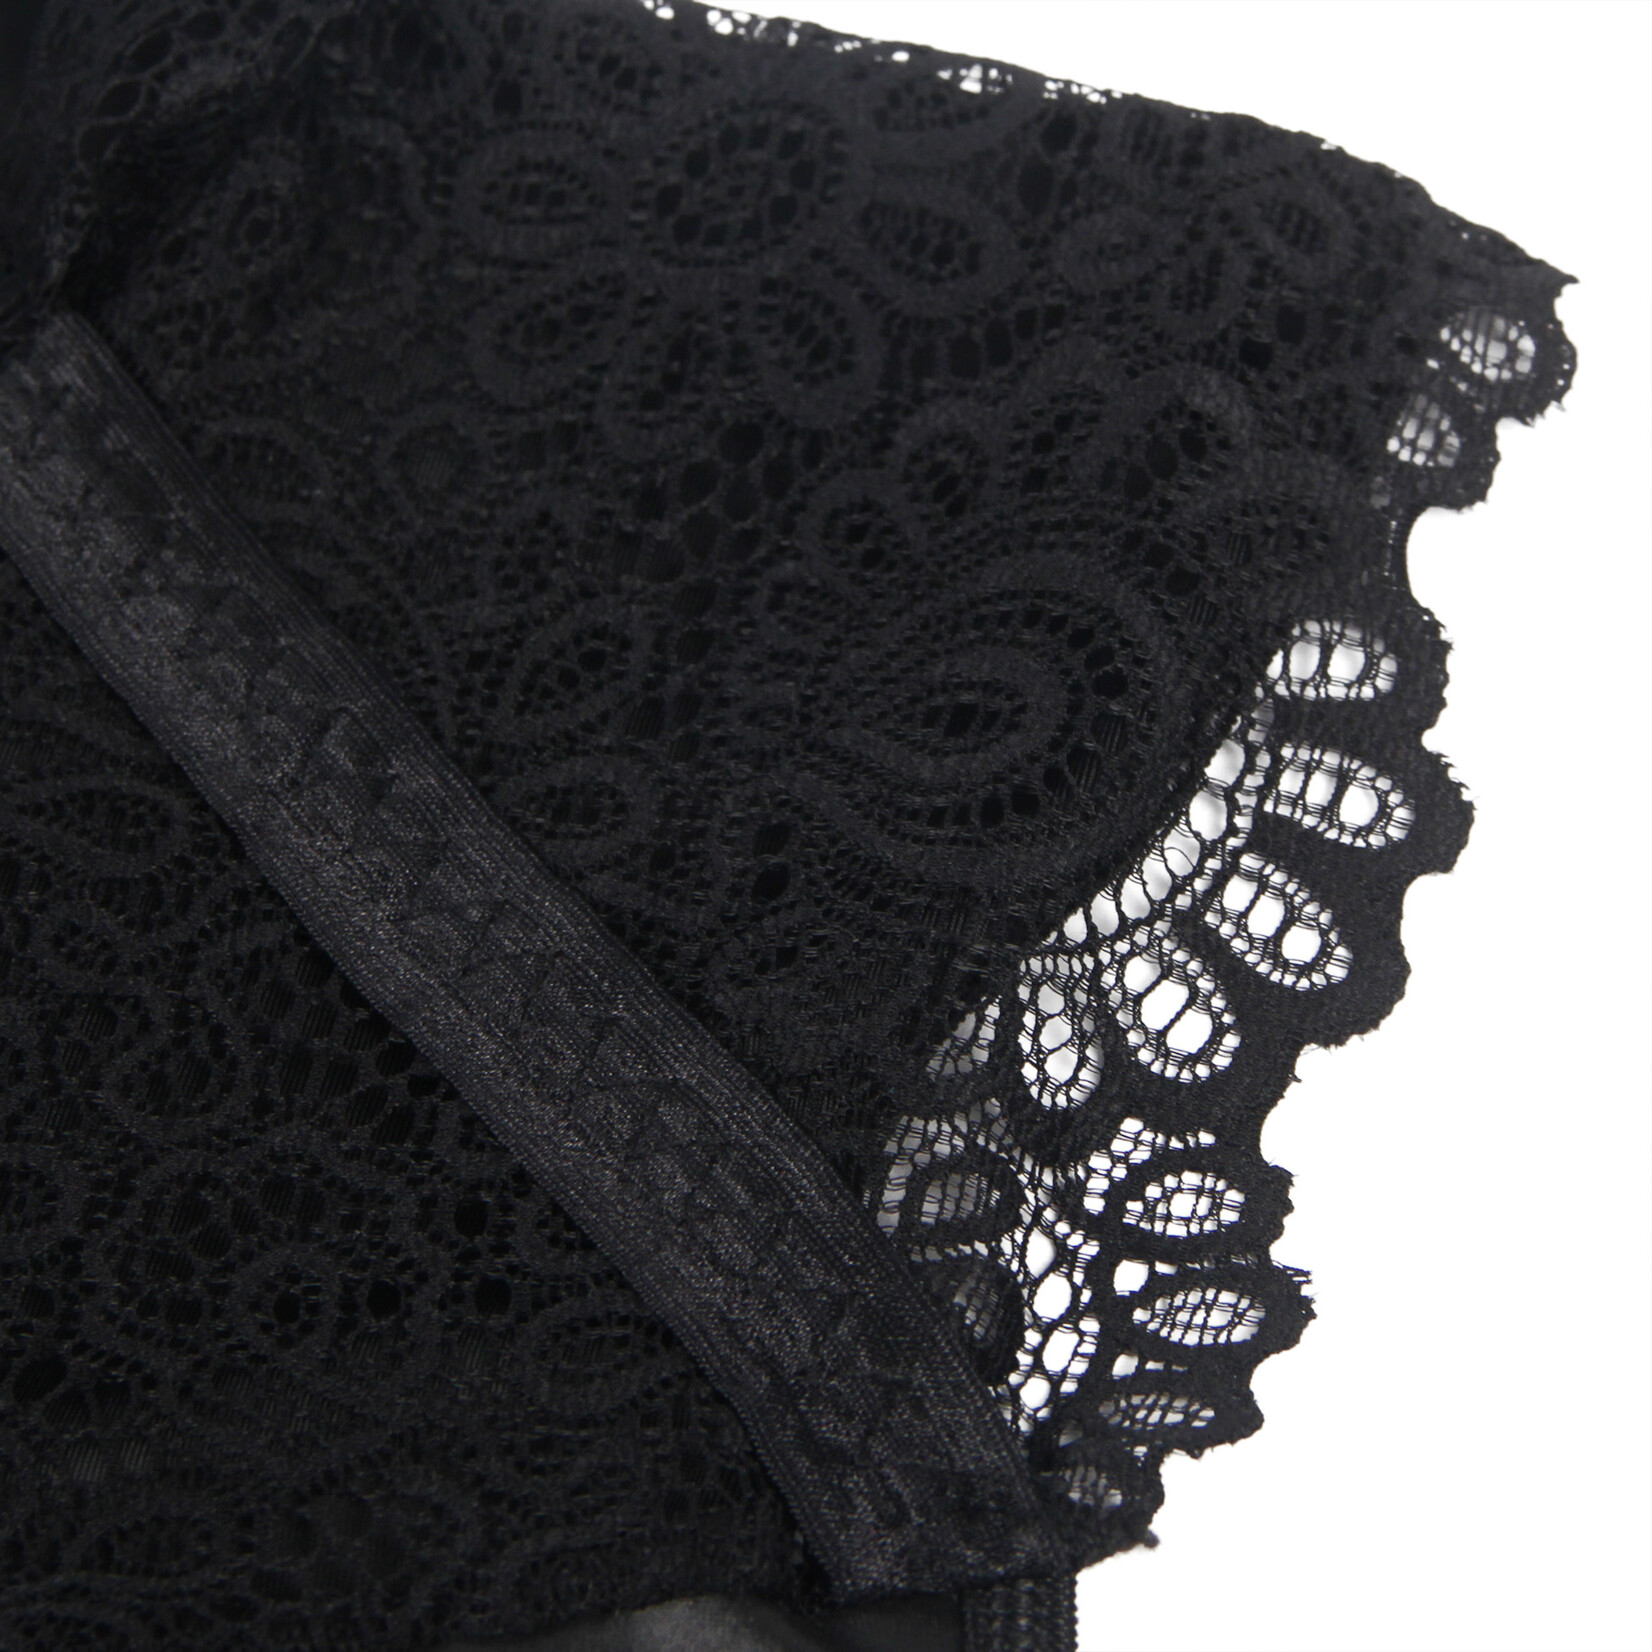 OH YEAH! -  SEXY BLACK LACE LEATHER LINGERIE M-L